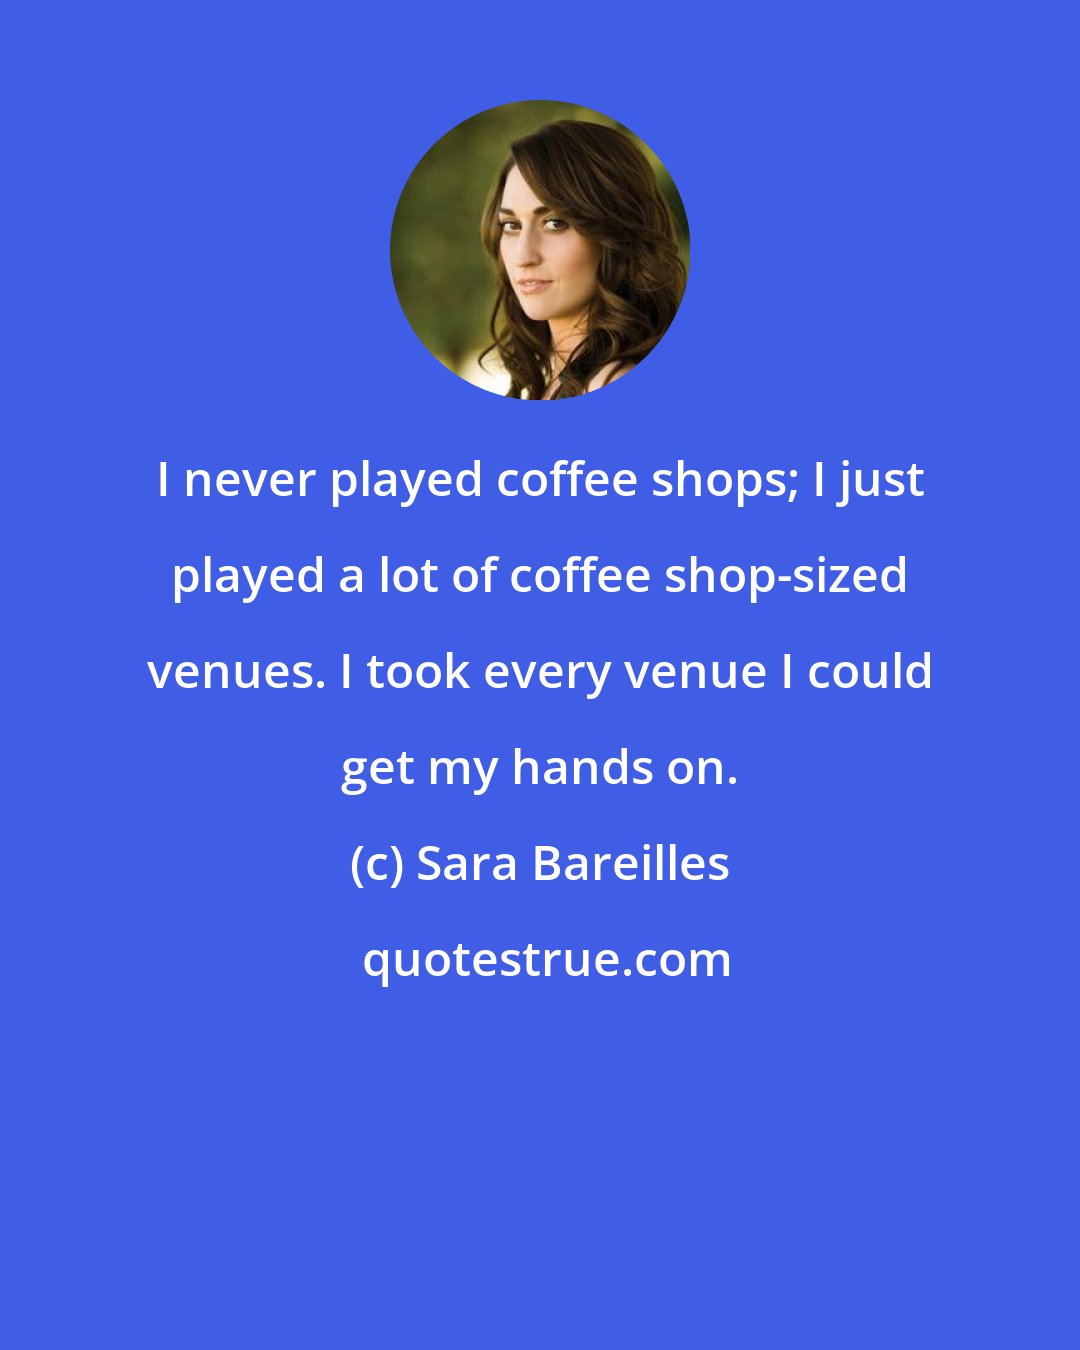 Sara Bareilles: I never played coffee shops; I just played a lot of coffee shop-sized venues. I took every venue I could get my hands on.